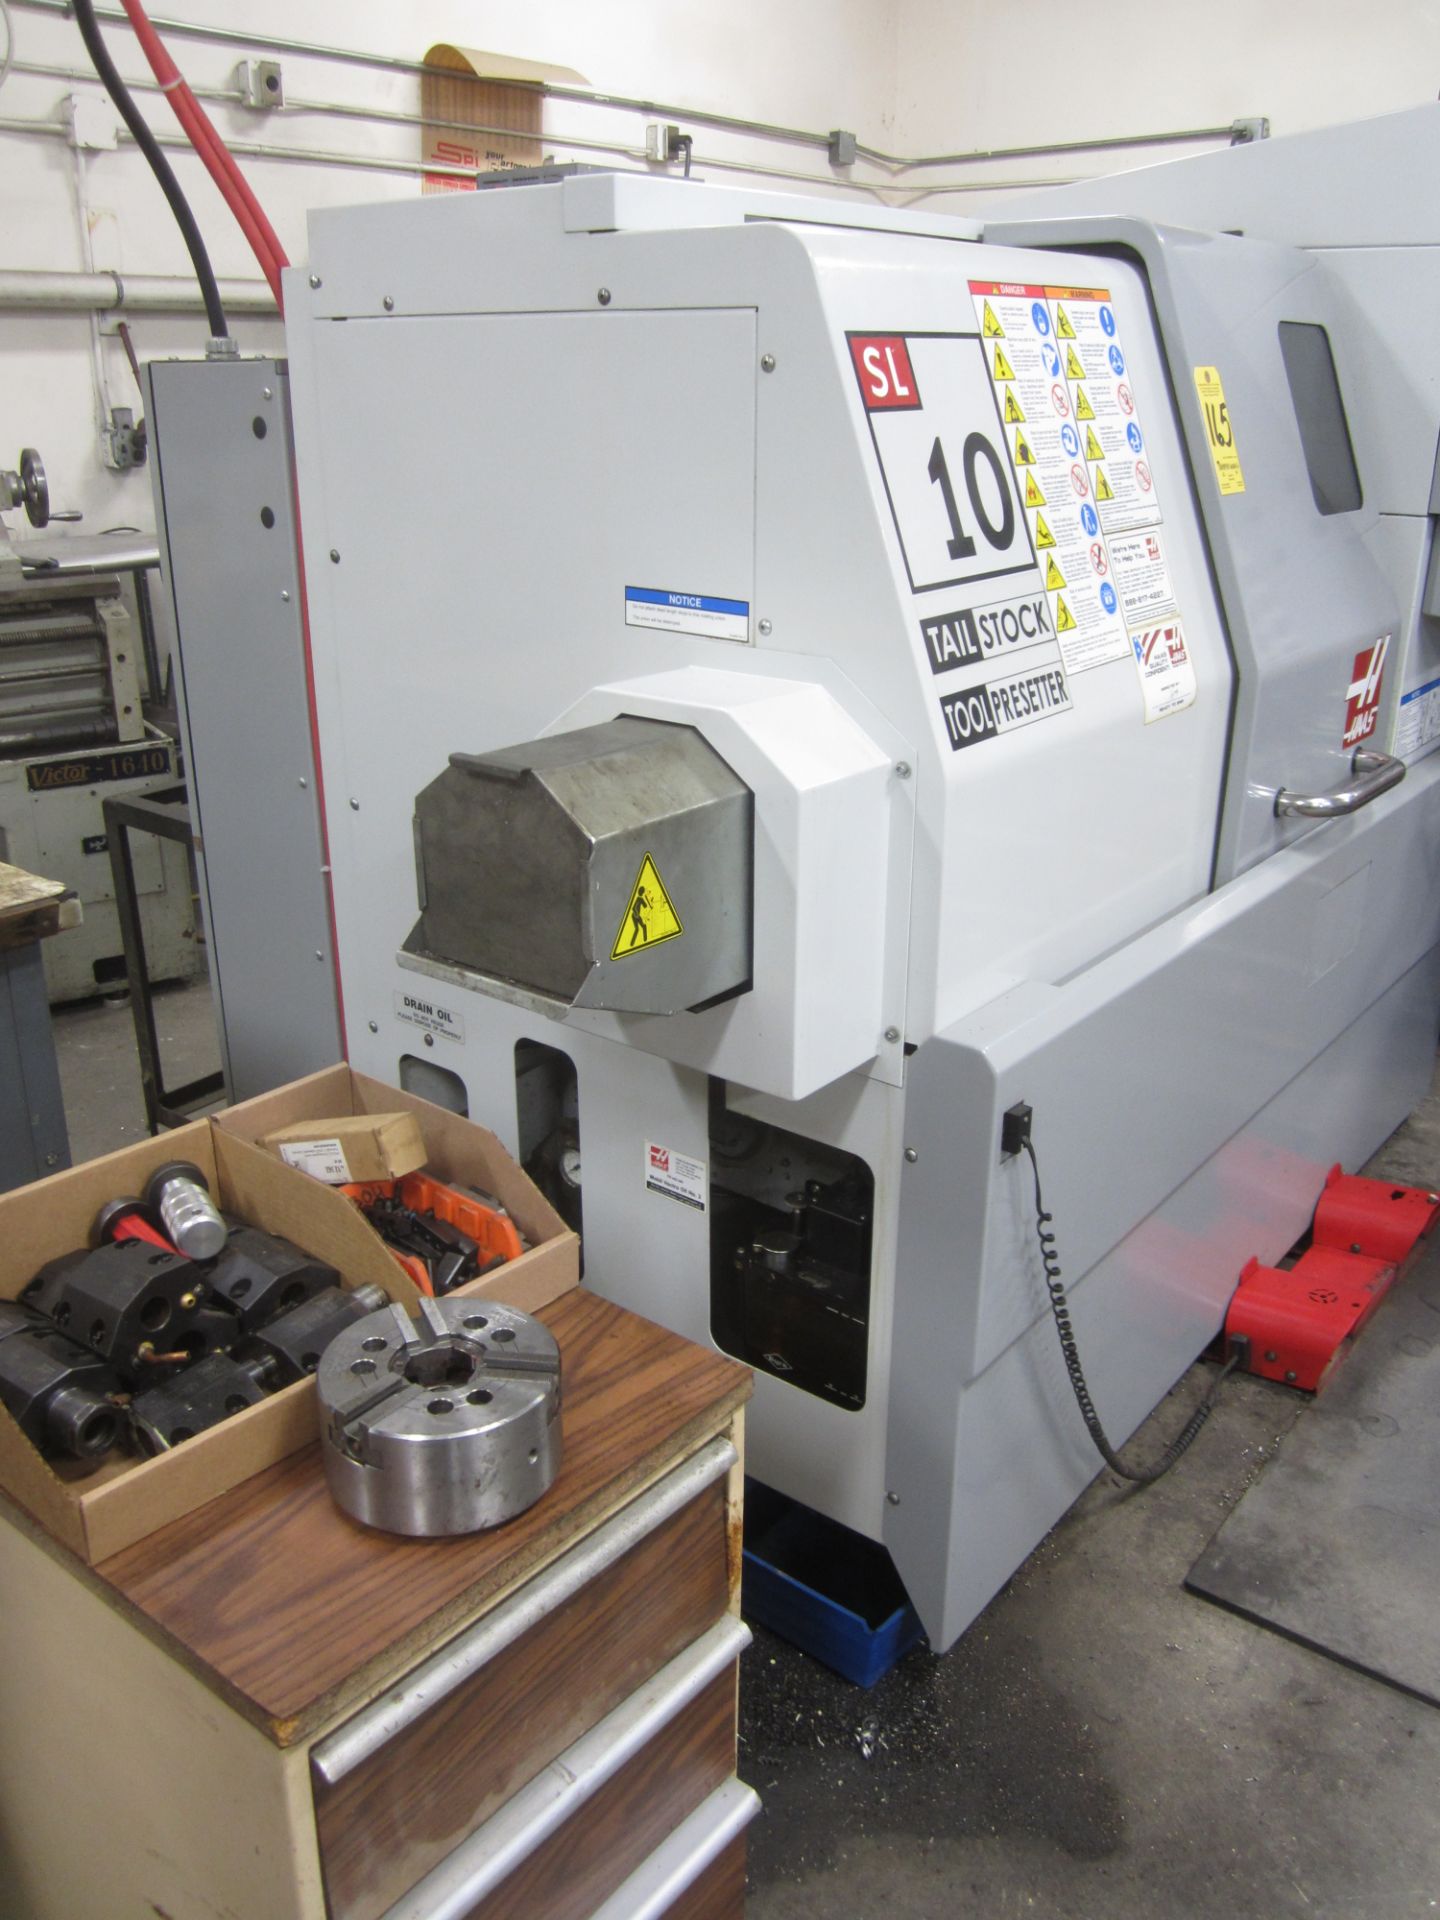 Haas SL10 CNC Turning Center, s/n 3081832, New 2008, Haas CNC Control, 1.75 In. Capacity, 15 HP, - Image 10 of 13